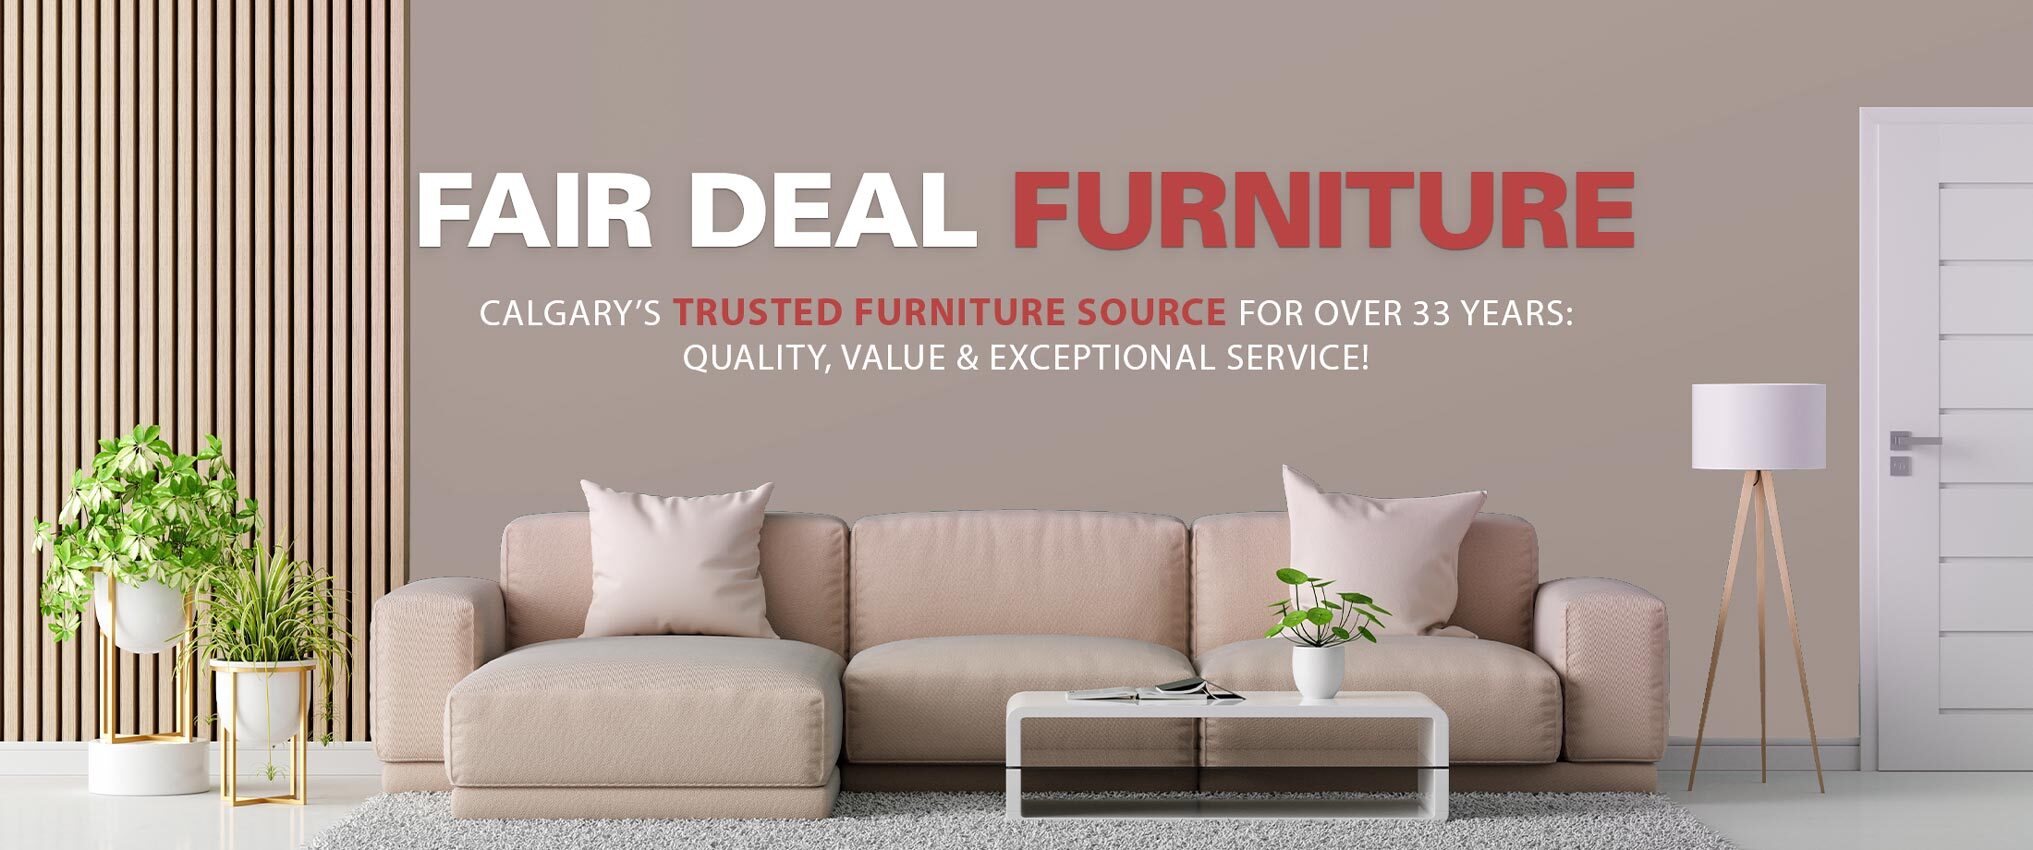 Fair Deal Furniture - Calgary's Trusted Furniture Source For Over 33 Years